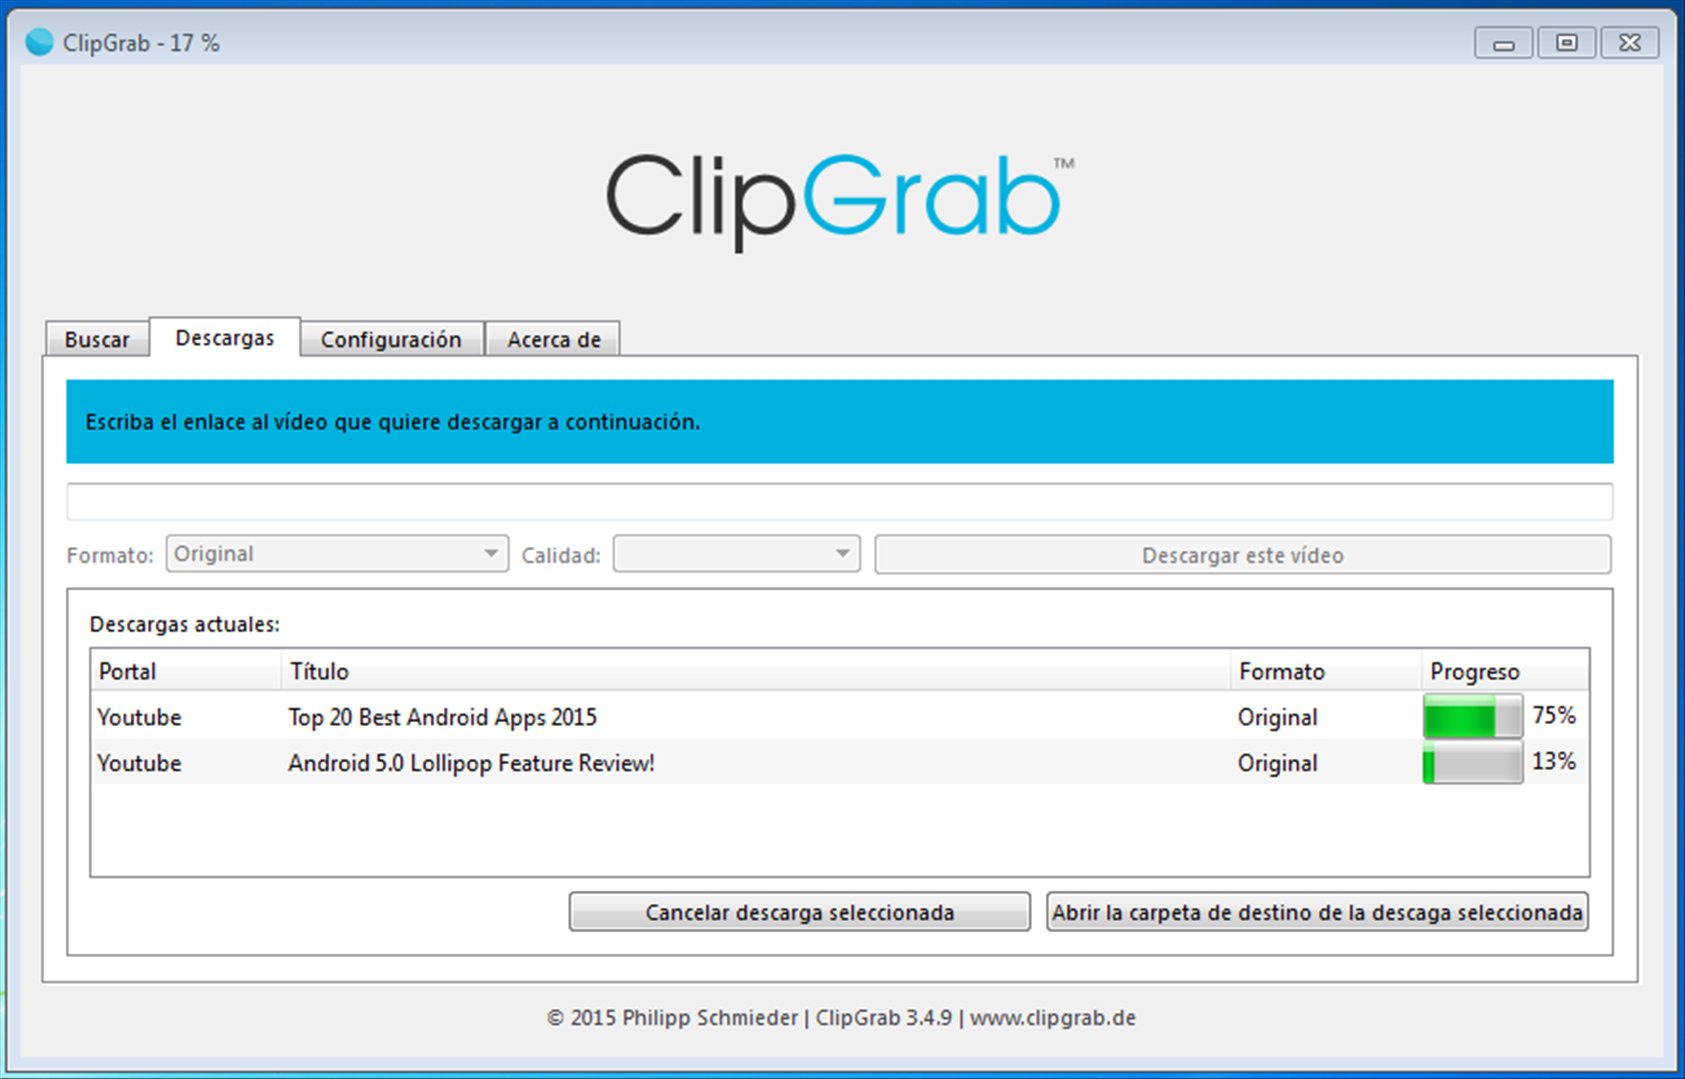 How to use clipgrab